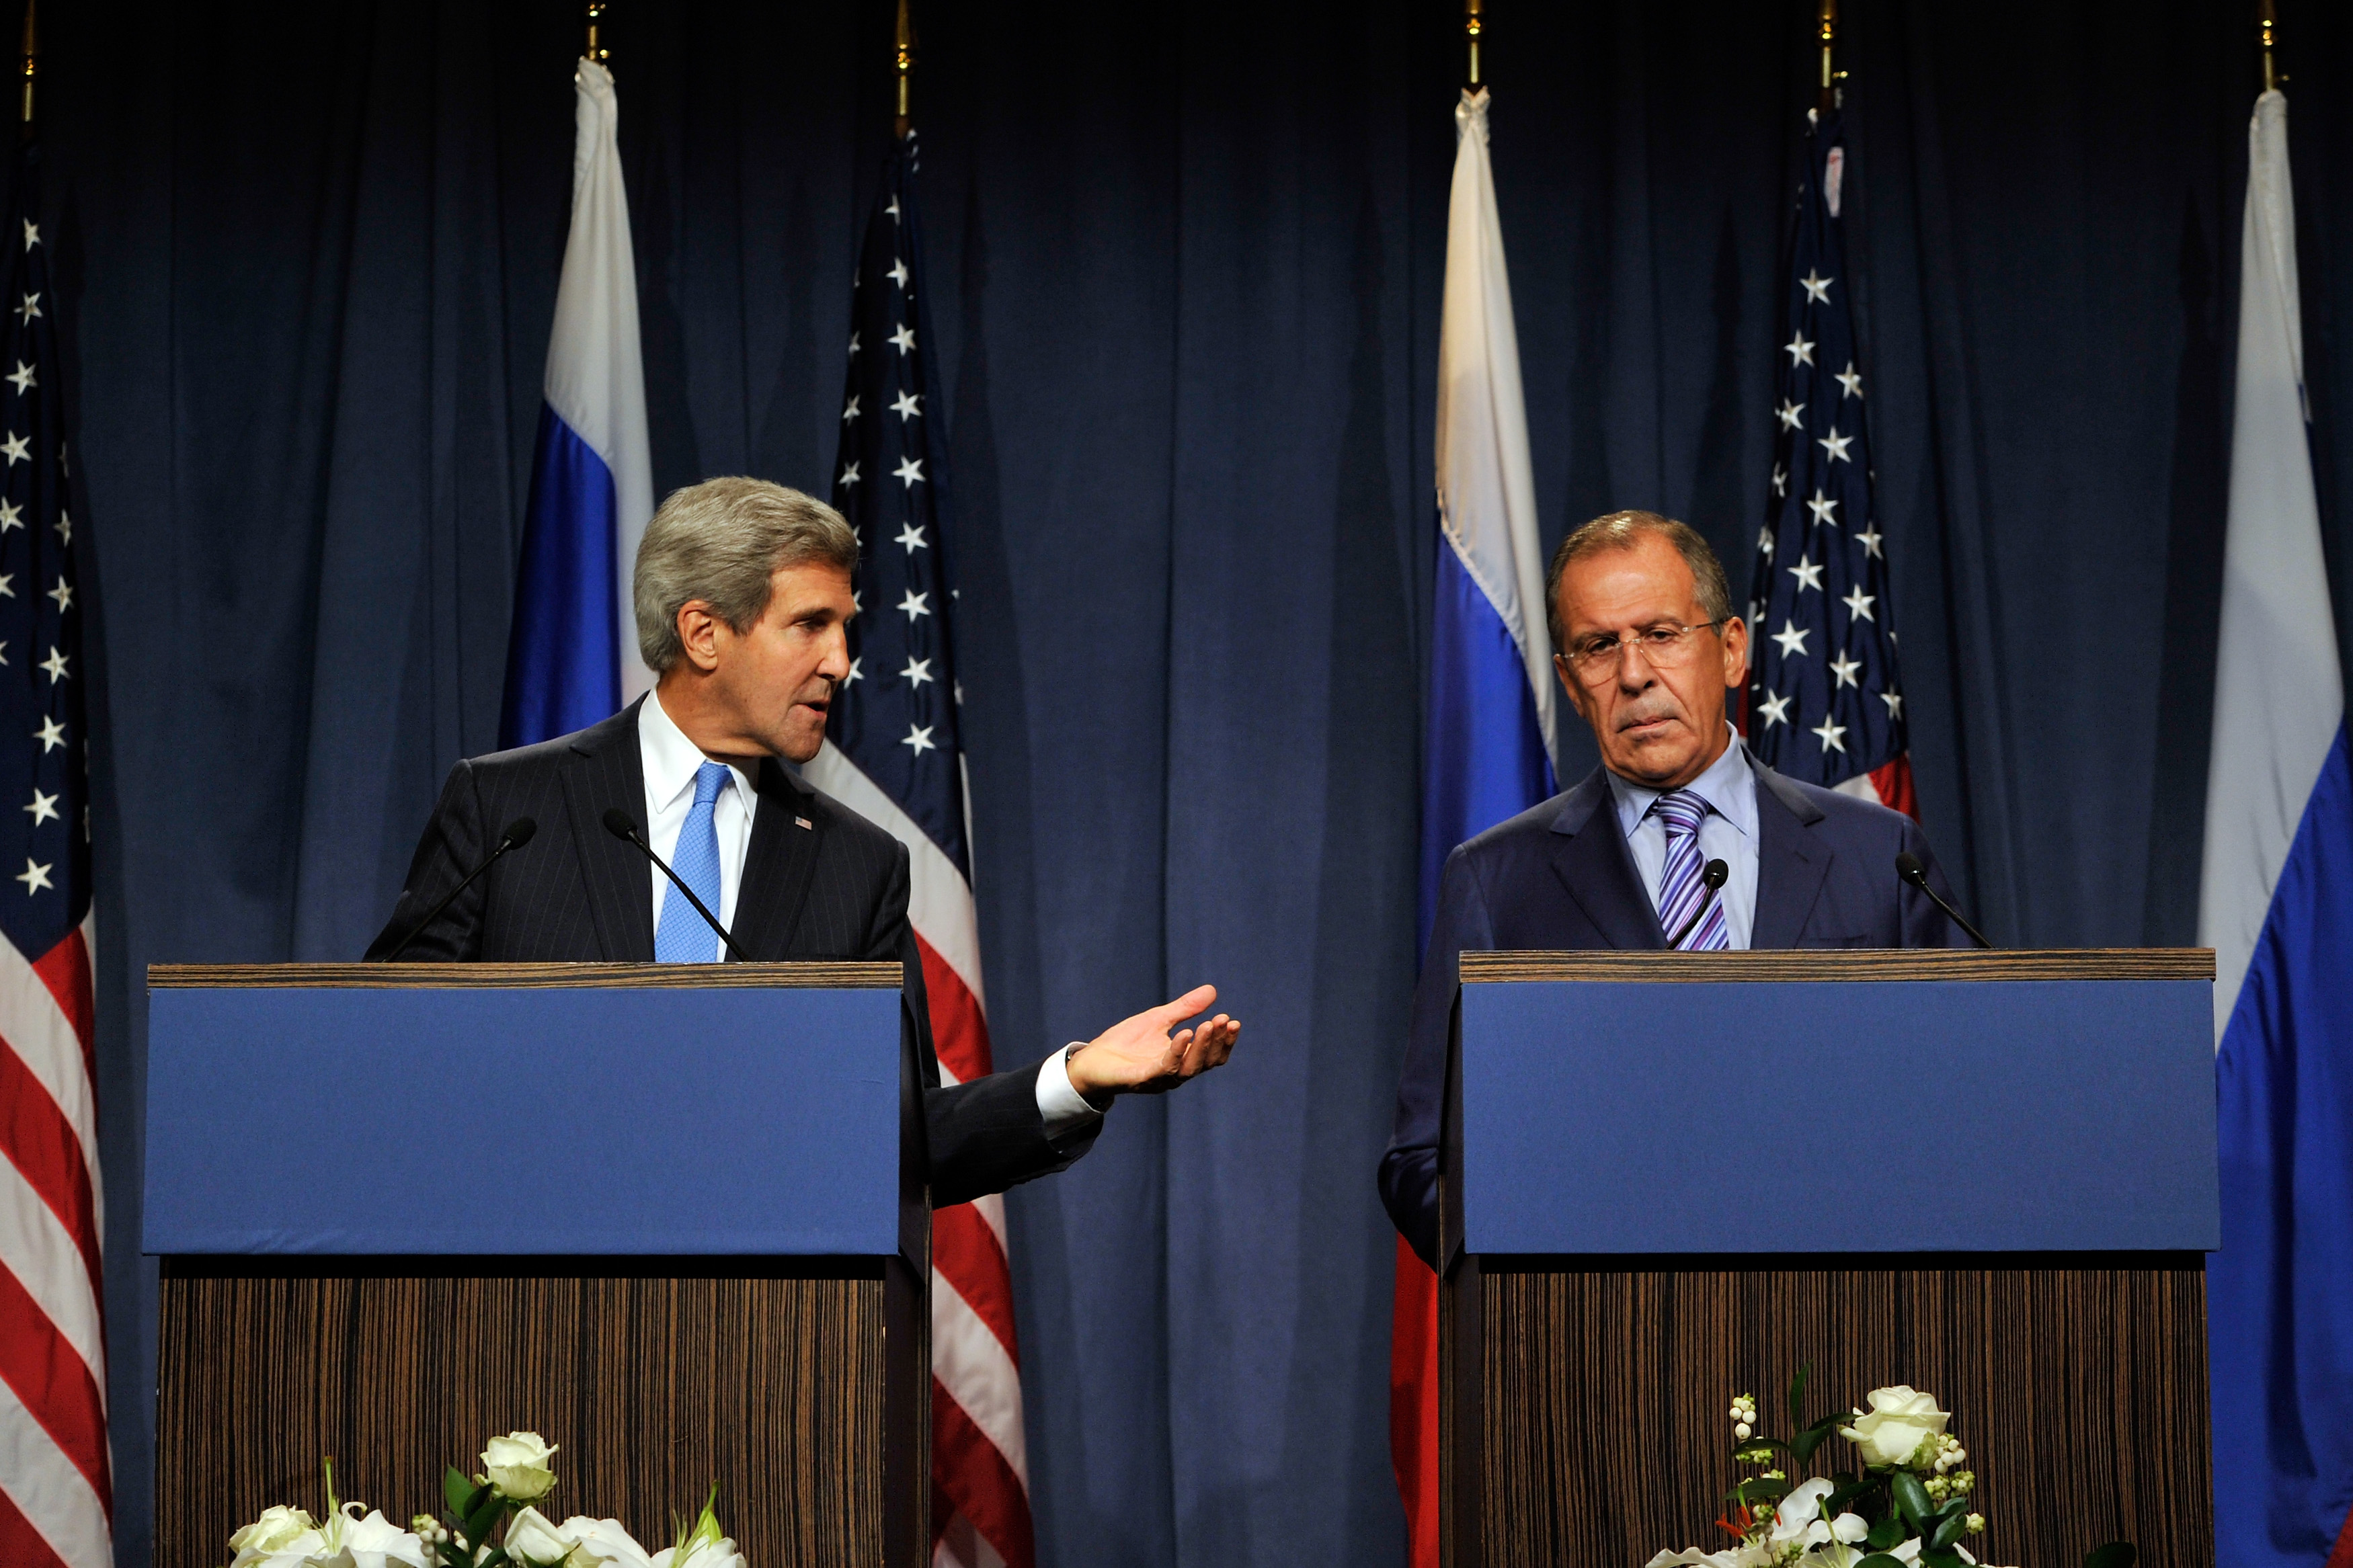 US Secretary of State John Kerry and Russian Foreign Minister Sergey Lavrov speak during a press conference in September 2013 in Geneva, Switzerland. 